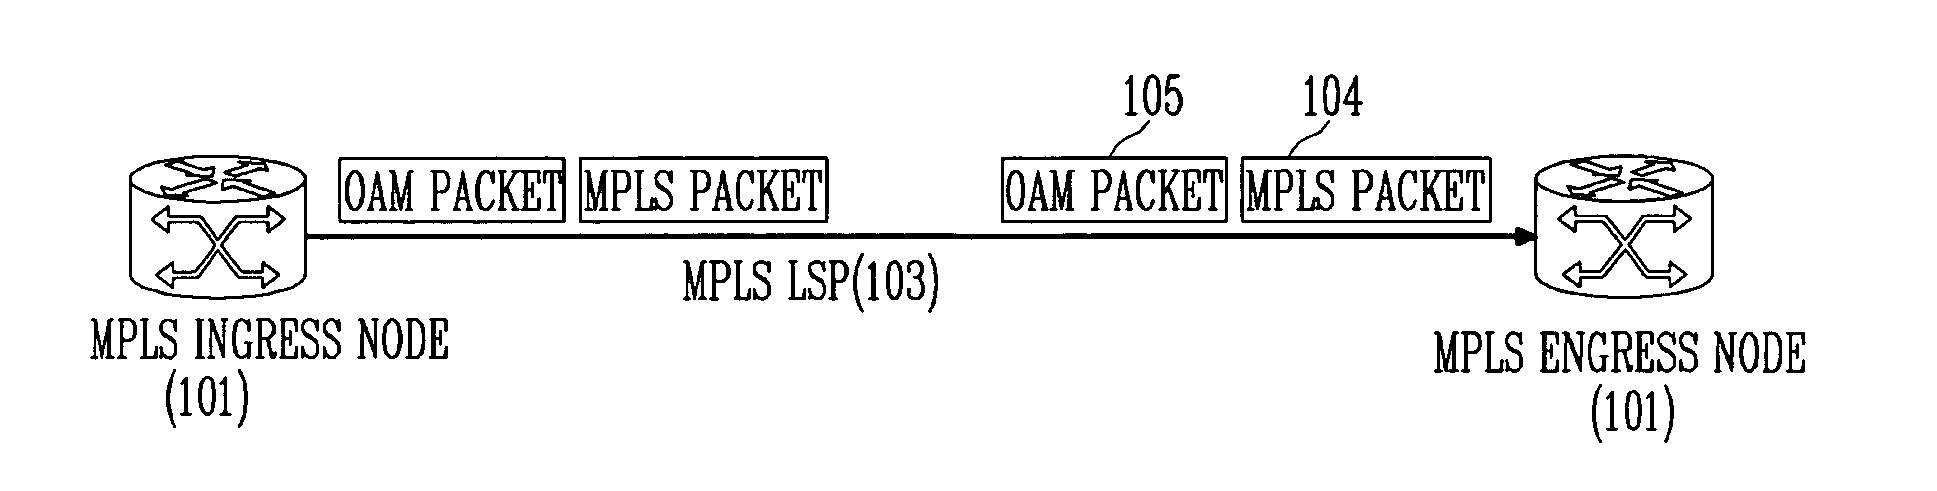 Method for measuring performance of MPLS LSP